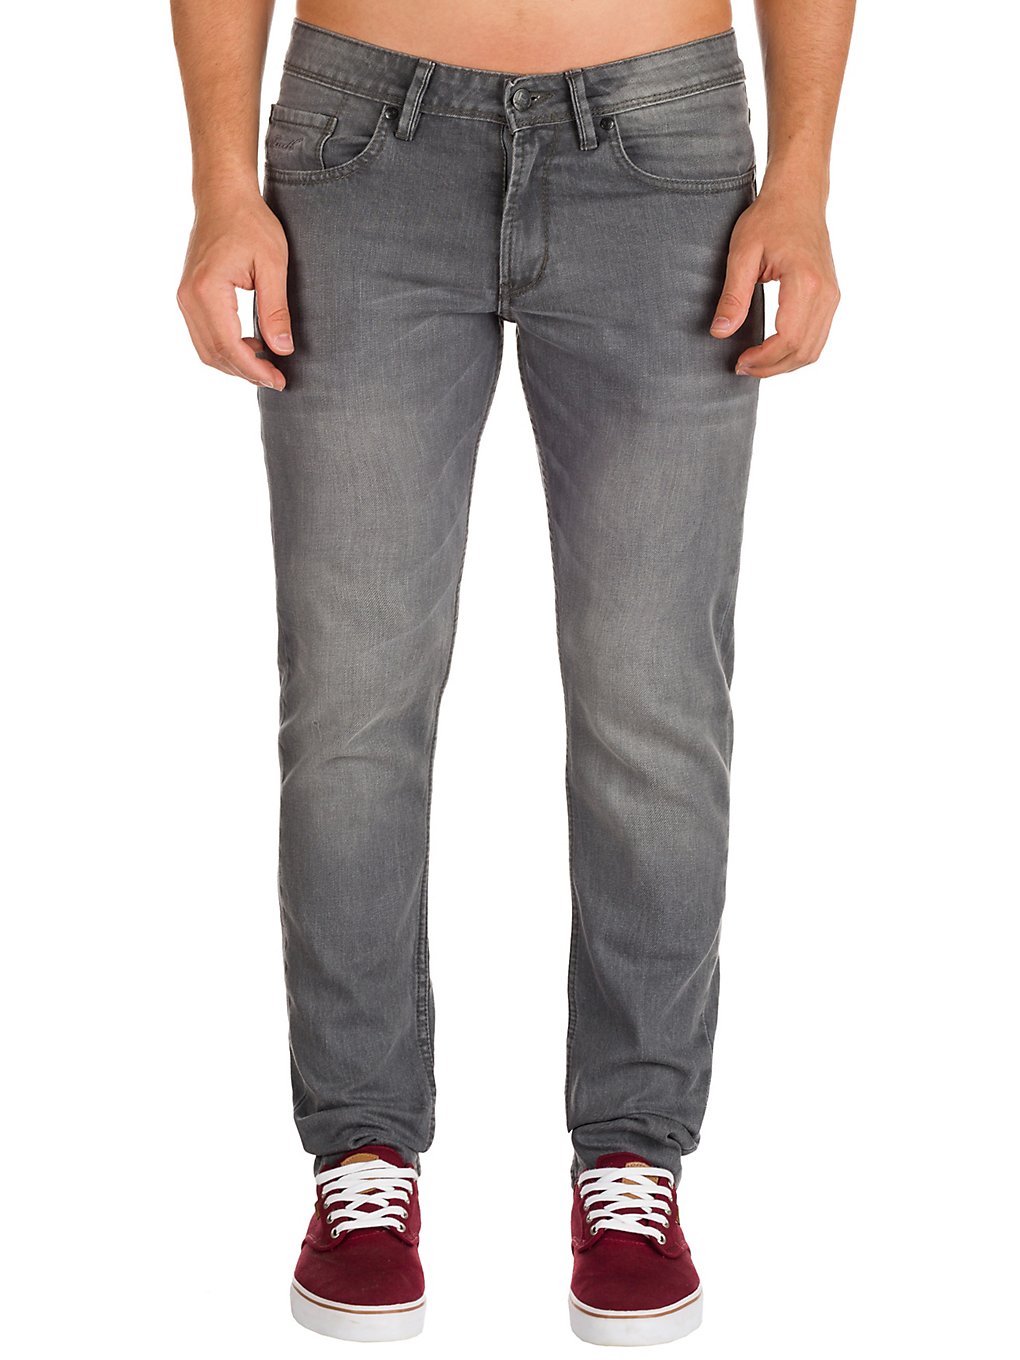 REELL Spider Jeans gris